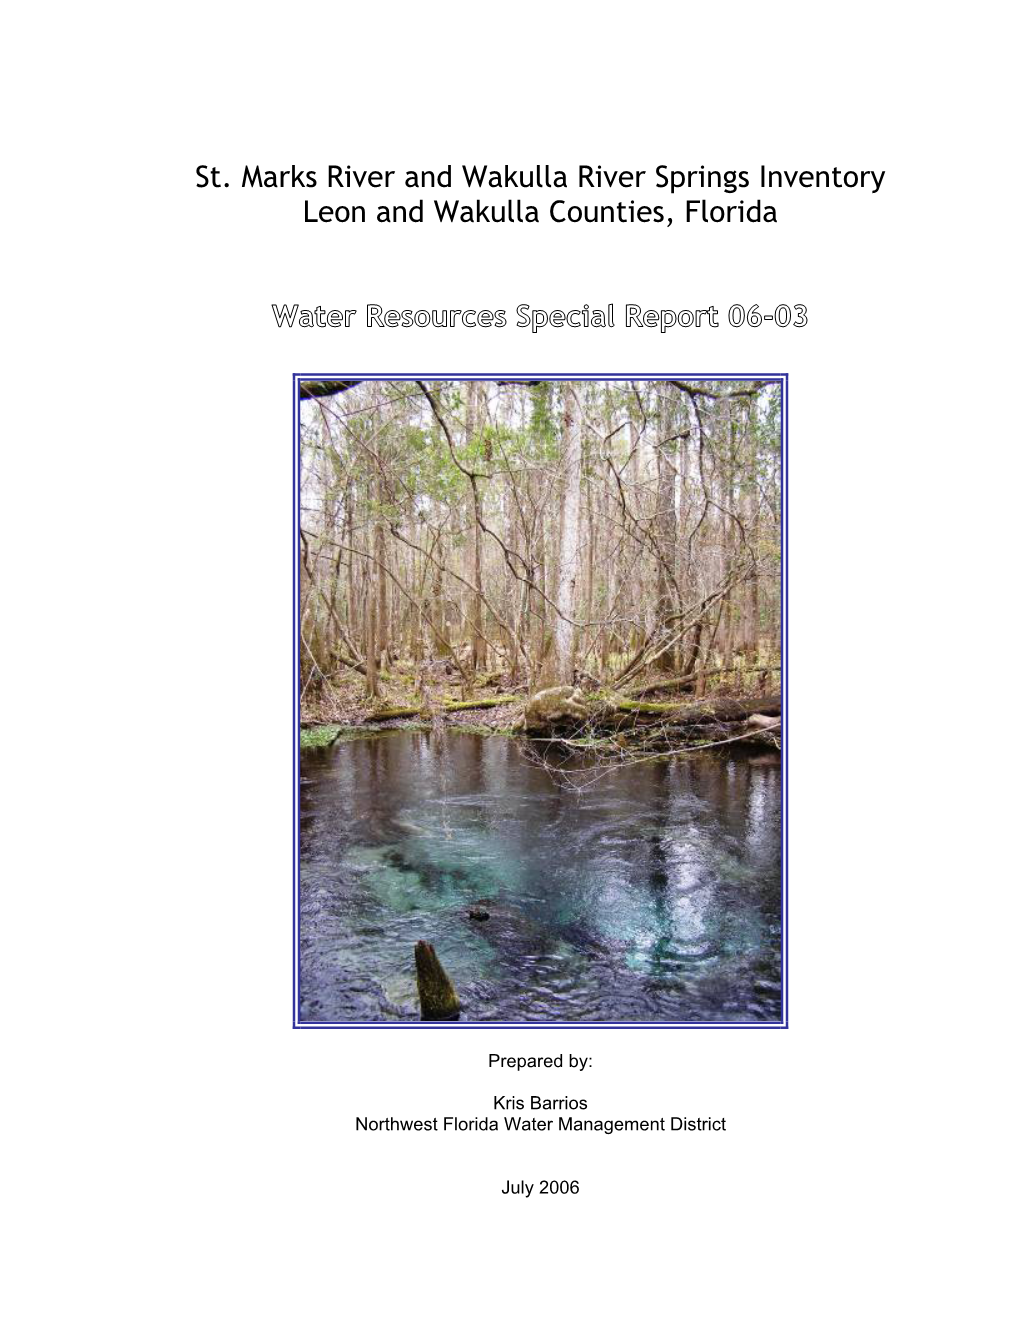 St. Marks River and Wakulla River Springs Inventory Leon and Wakulla Counties, Florida